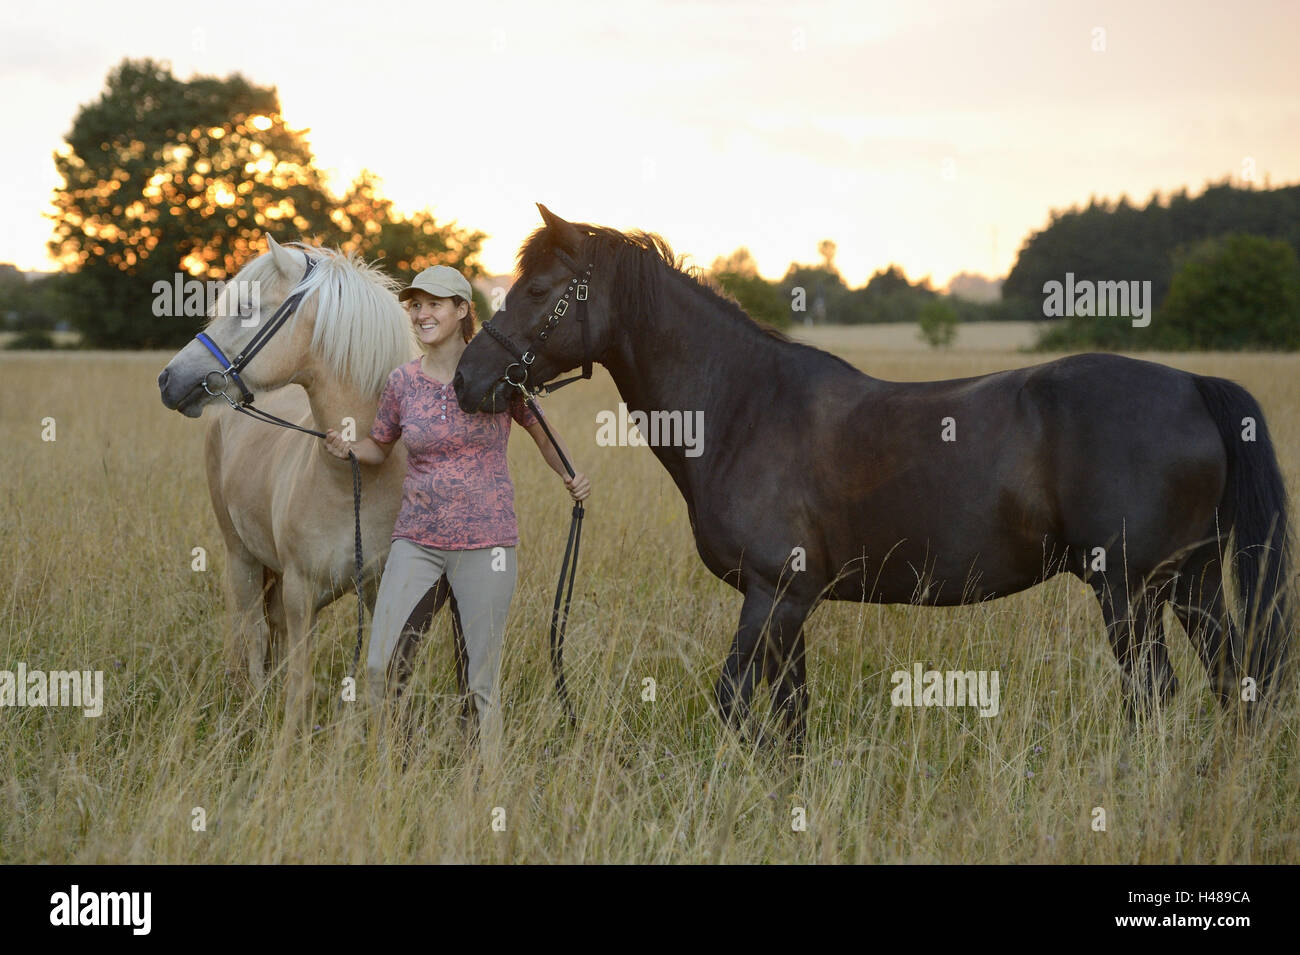 Rider, horses, meadow, standing, side view, landscape, Stock Photo